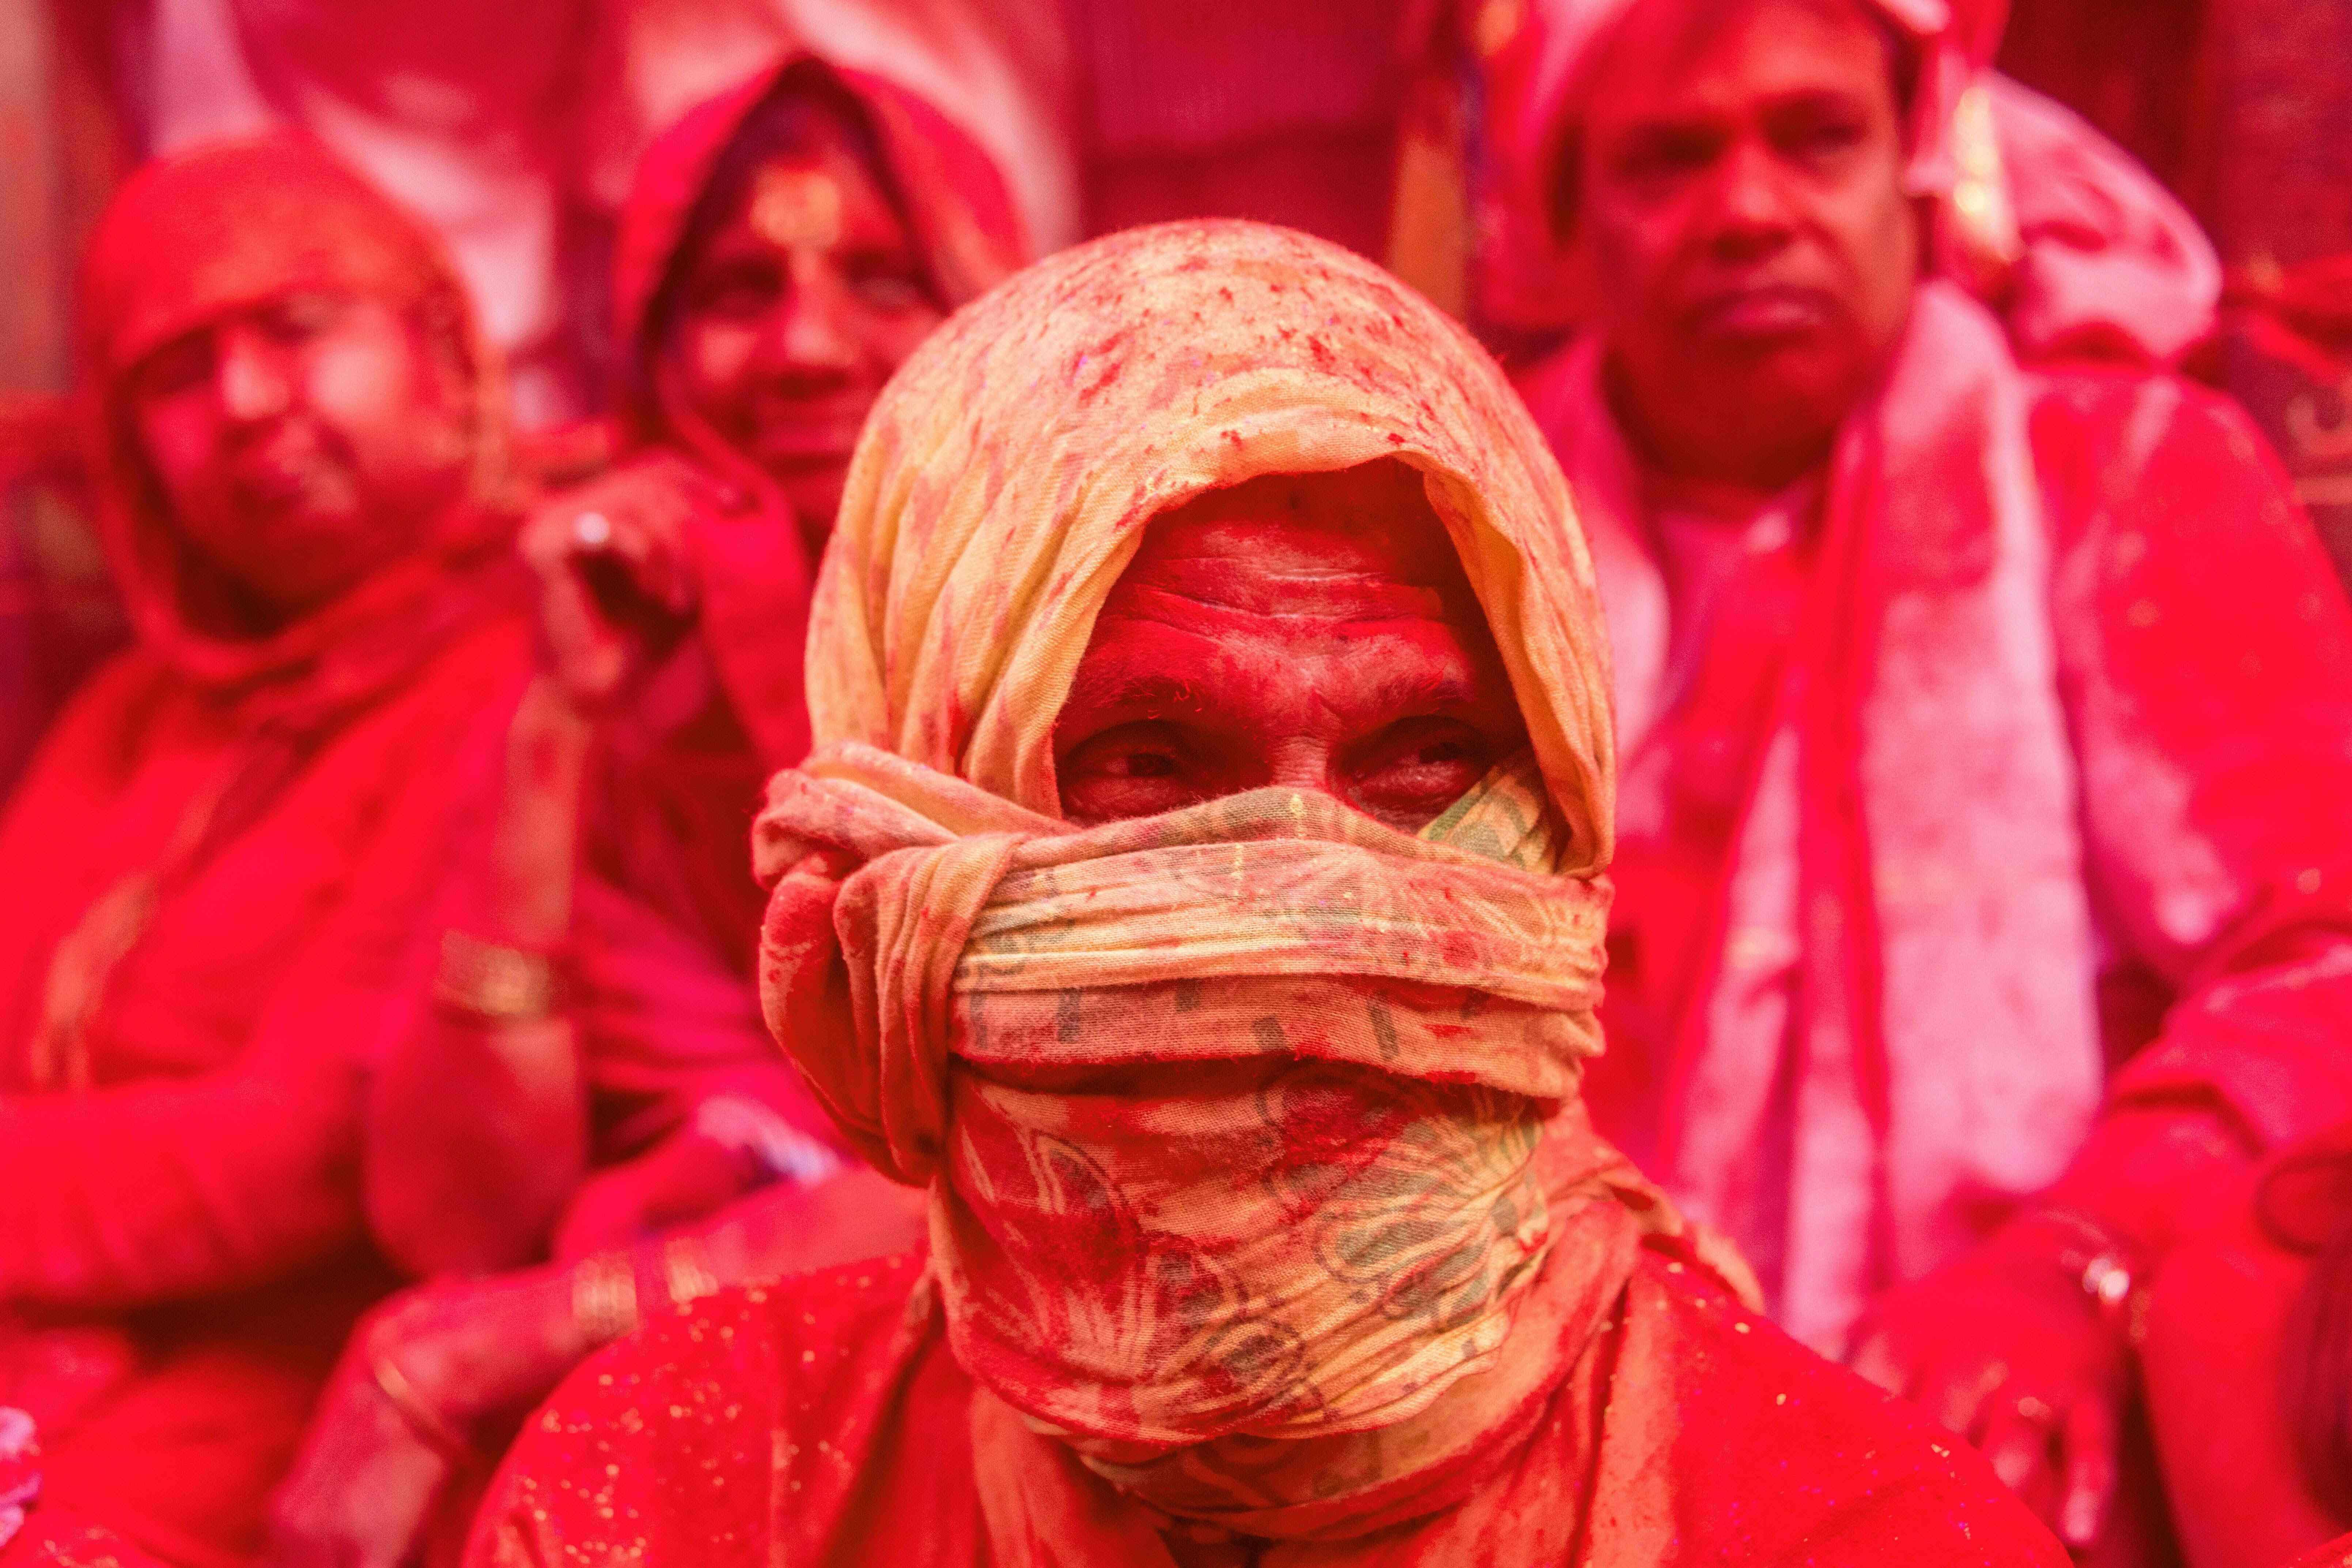 TOPSHOT - Indian villagers are covered in coloured powder during the Lathmar Holi festival at the Radha Rani temple in Barsana, some 130kms from New Delhi on March 16, 2016.  During the Lathmar Holi festival, the women of Barsana, the legendary hometown of Radha, consort of Hindu God Krishna, attack the men from Nandgaon, the hometown of Hindu God Krishna, with wooden sticks in response to their efforts to put color on them. / AFP PHOTO / François Xavier MARIT